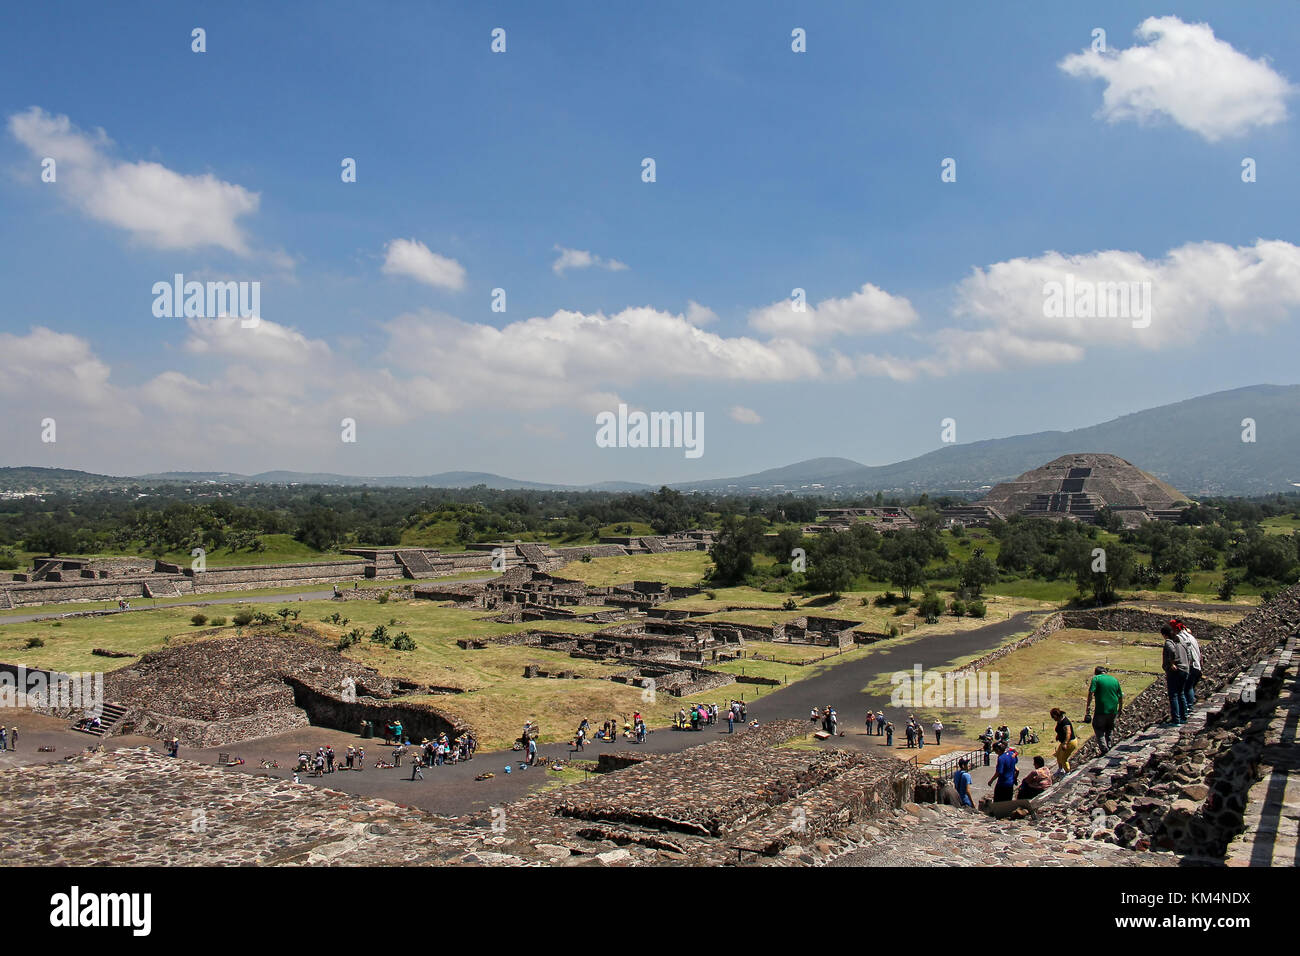 Pyramid of the moon, in Mexico Stock Photo